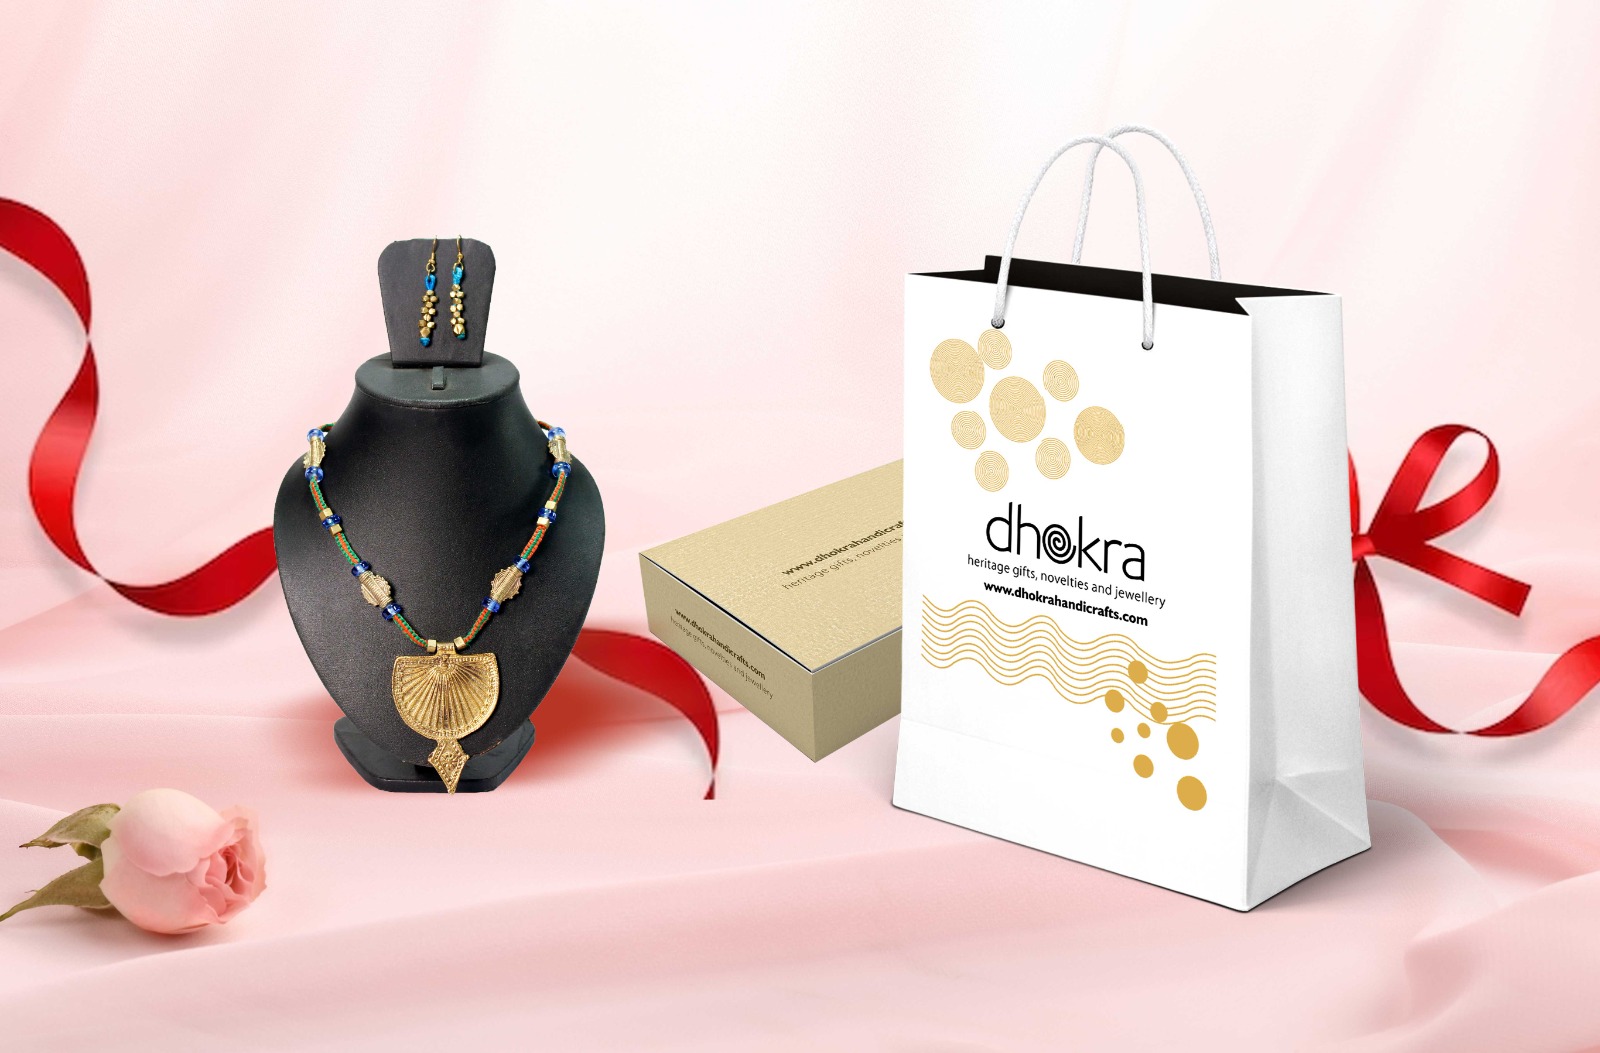 Step Into  the New Year With These Exclusive Dhokra Gifts